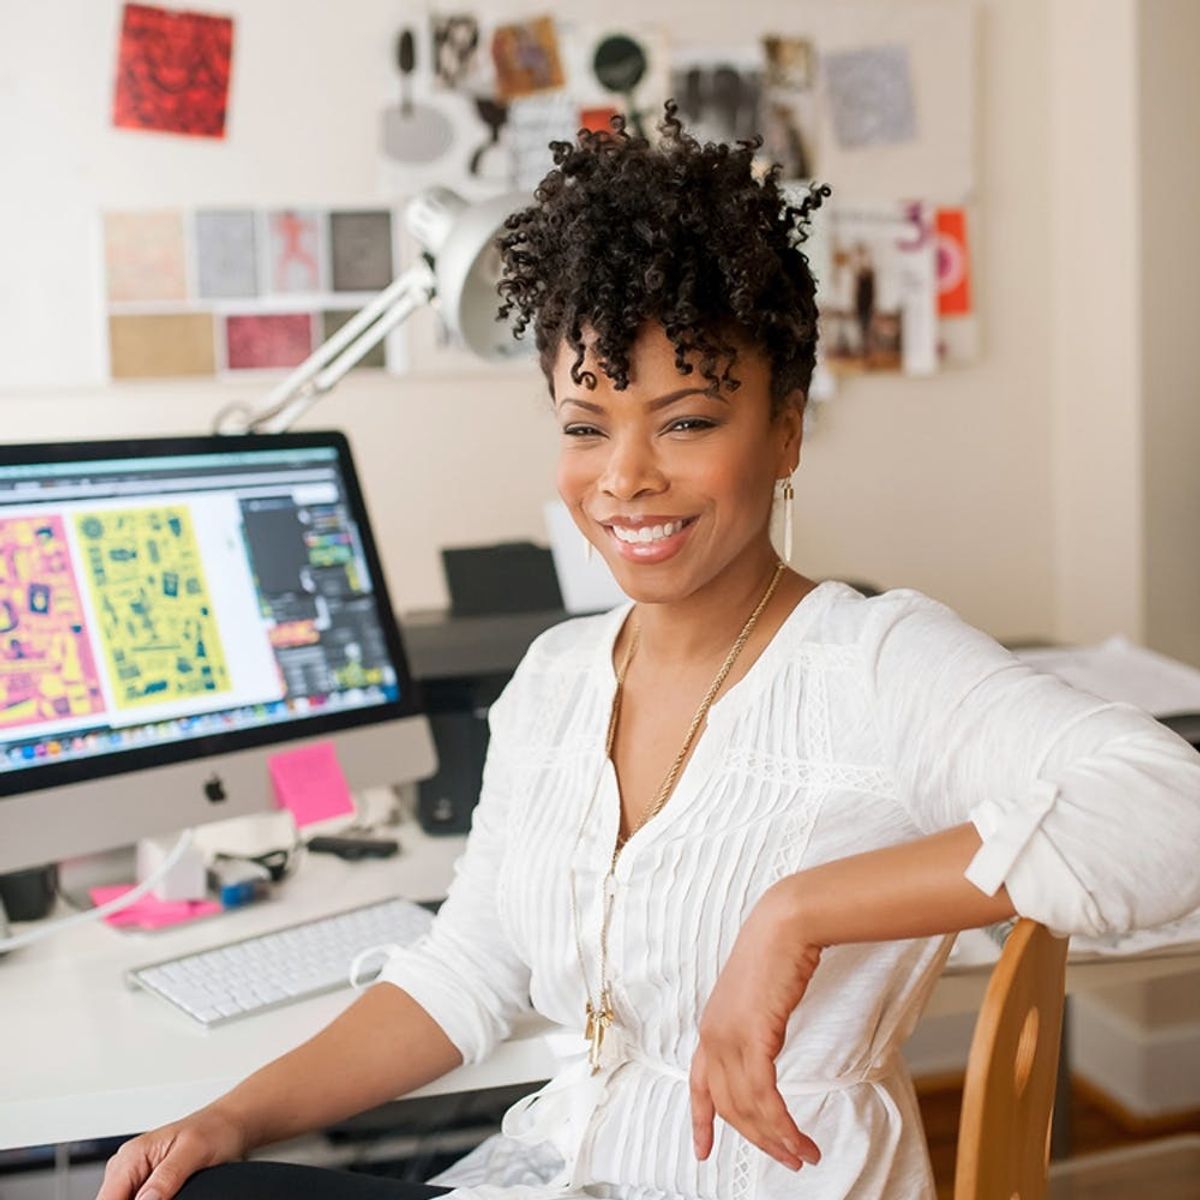 Artist Andrea Pippins Wants You to Drop Everything and Go for It